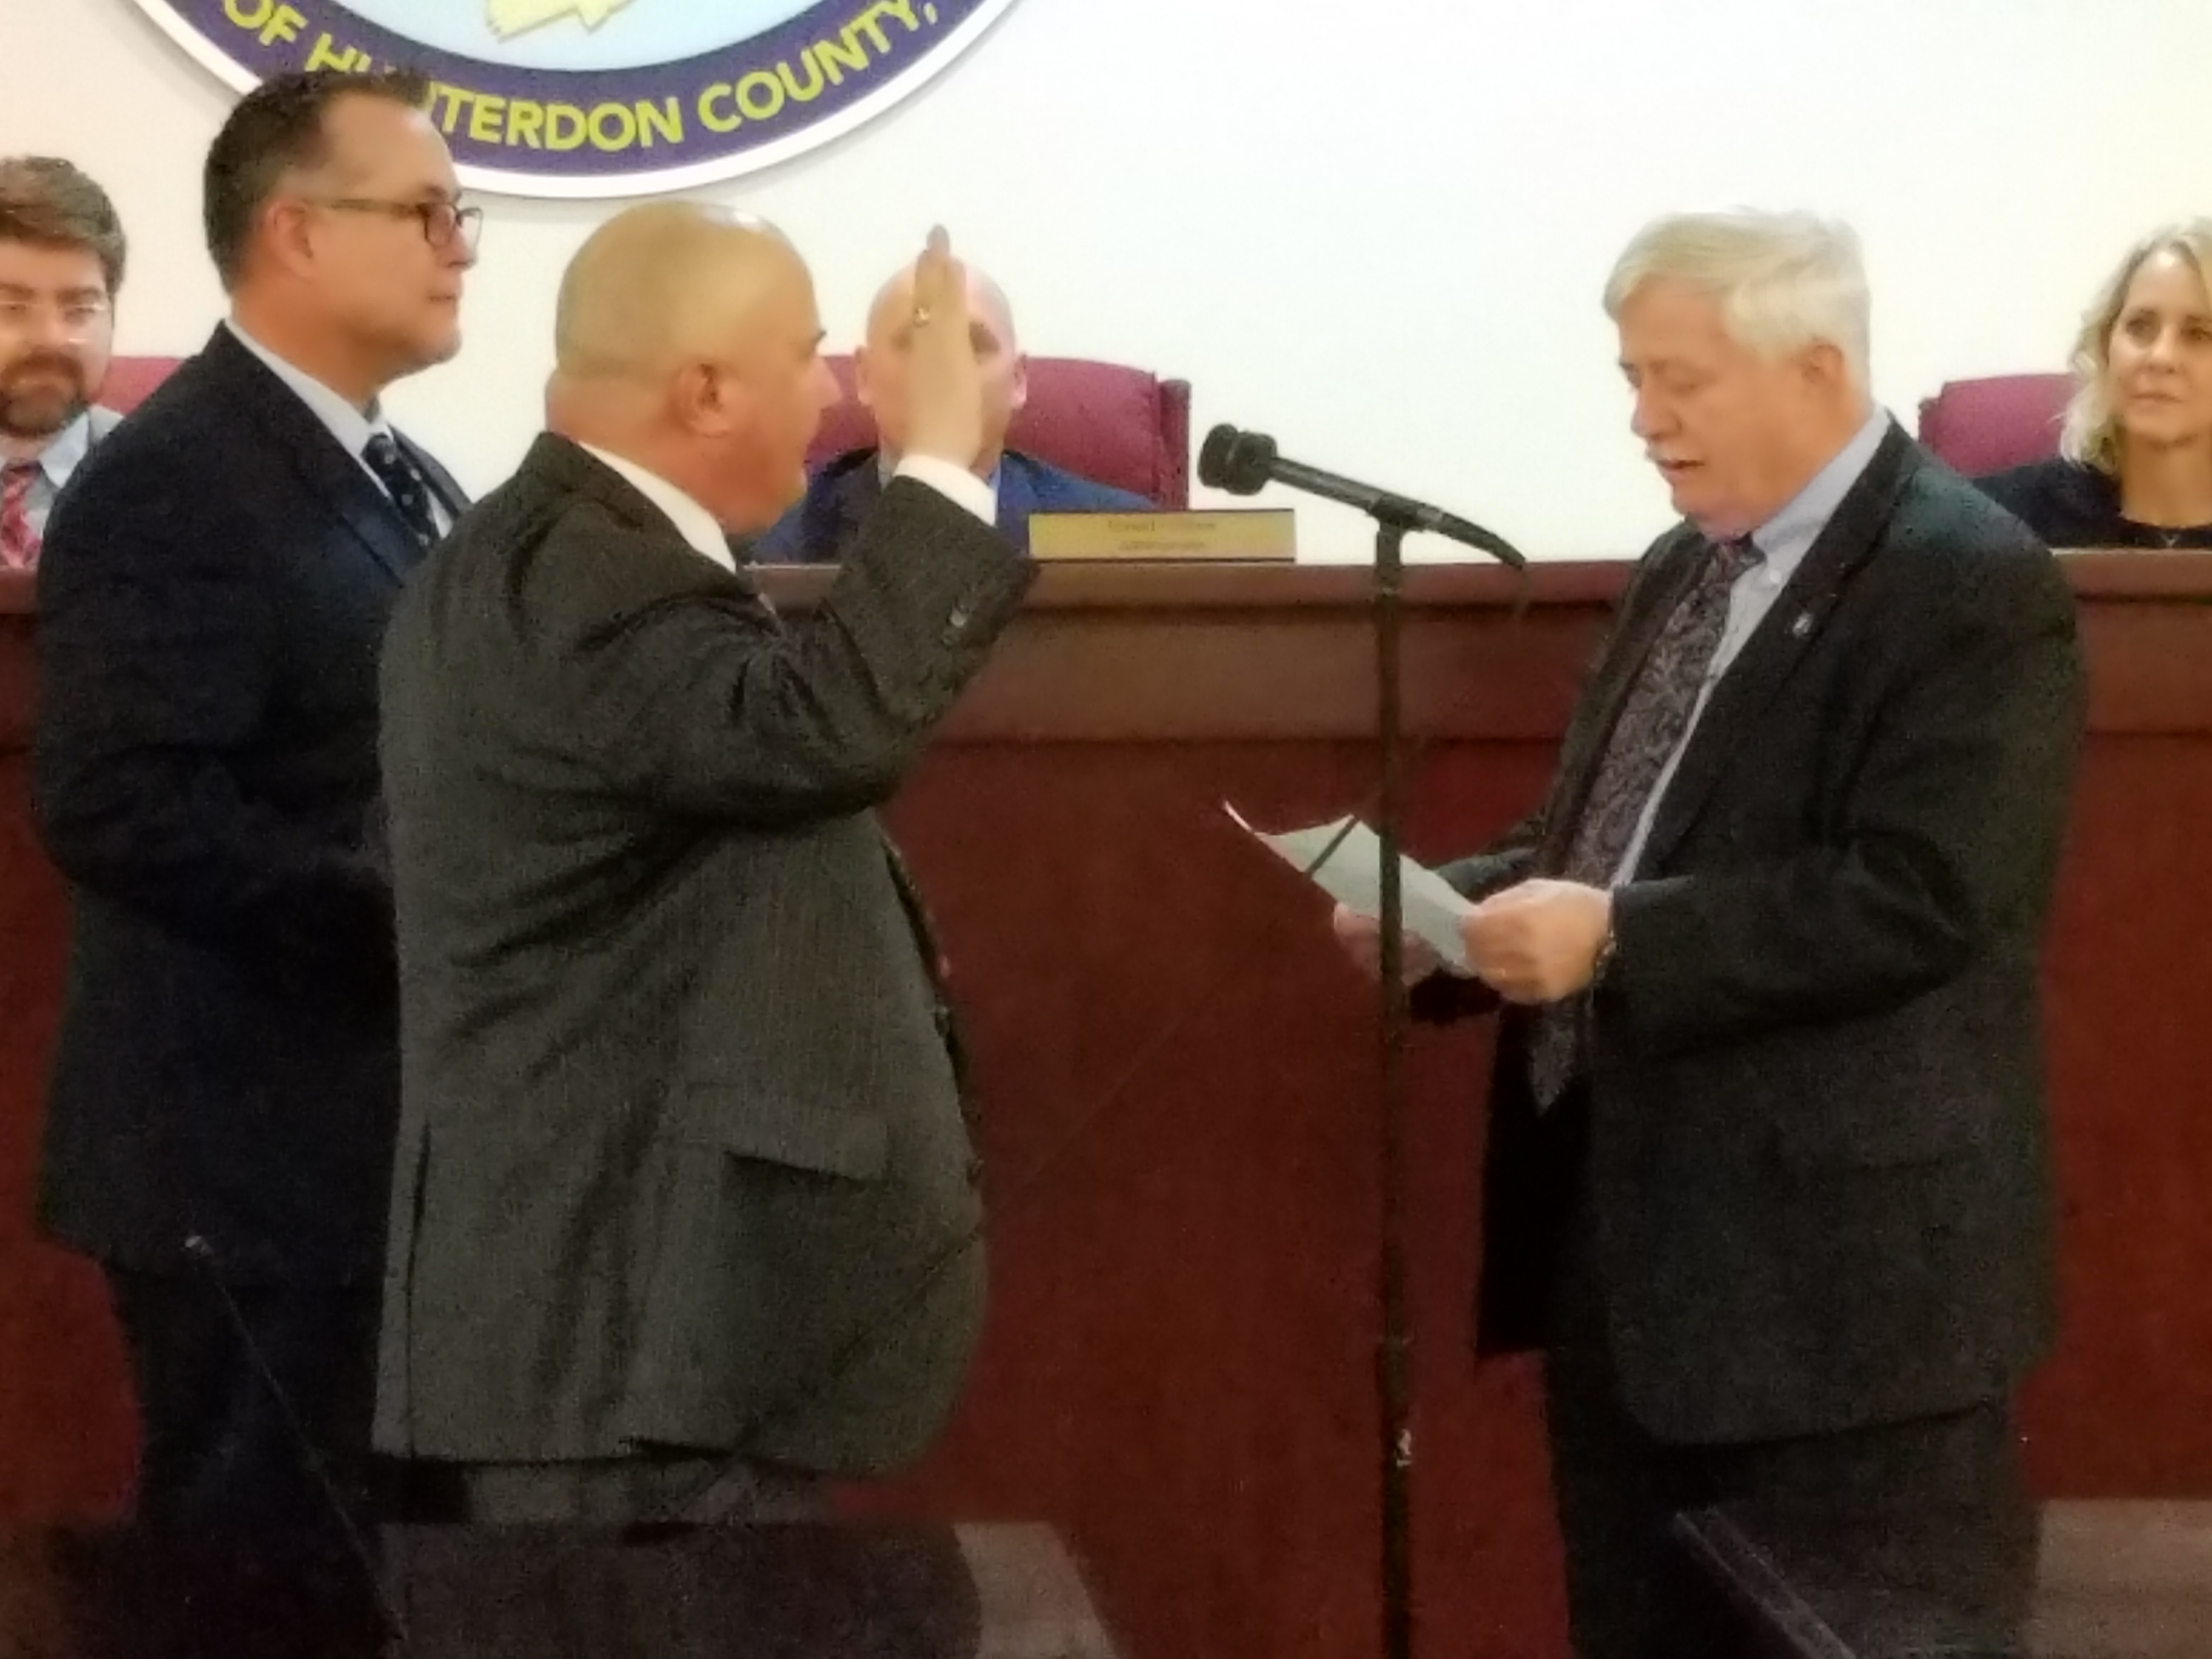 Lou Reiner sworn in for Raritan Twp. Committee by Sheriff Fred Brown